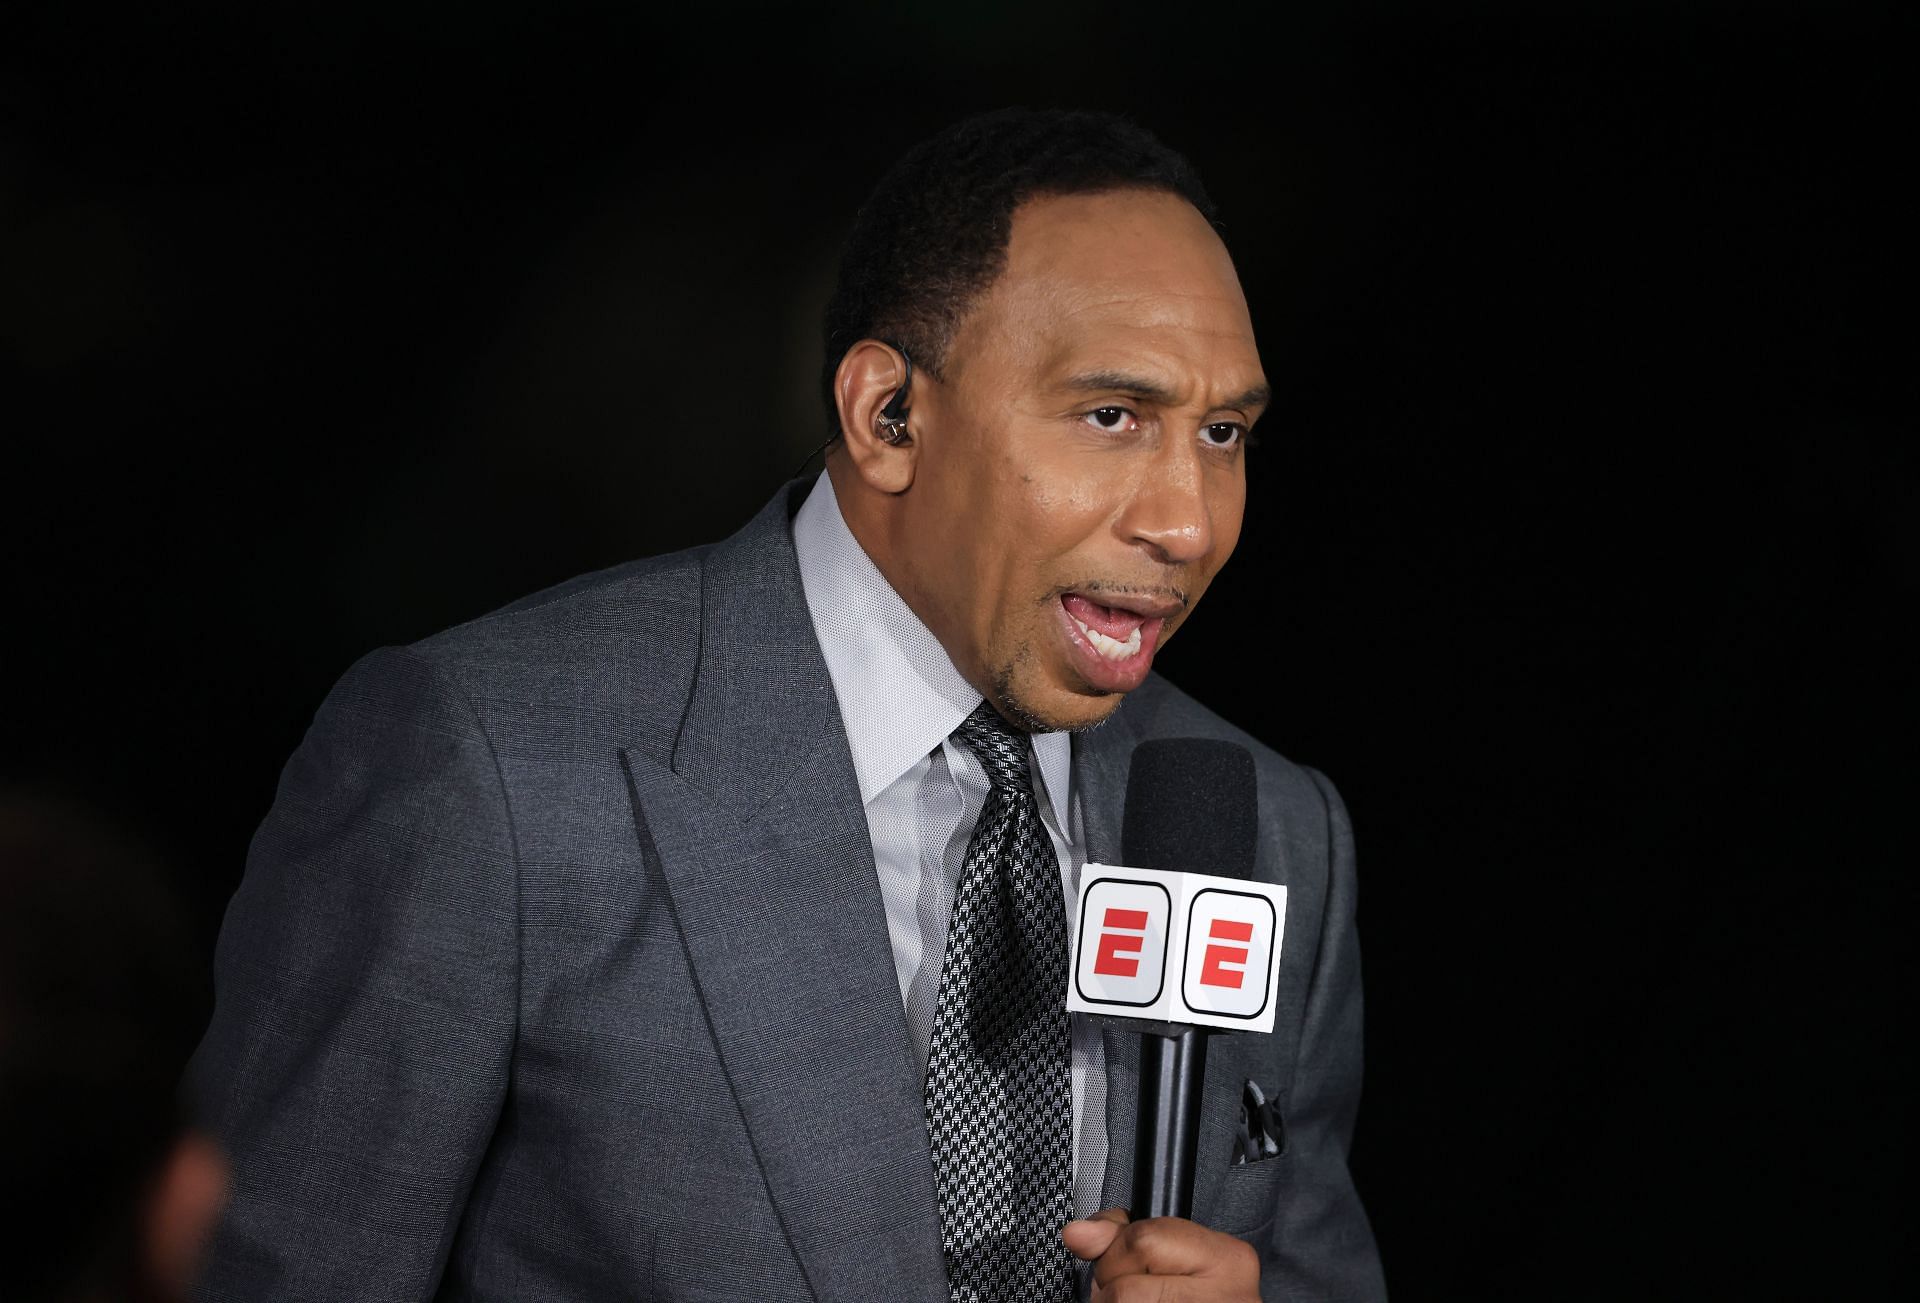 Stephen A. Smith ripped the officiating for the technical foul on Al Horford following an inadvertent elbow to Giannis Antetokounmpo&#039;s face.